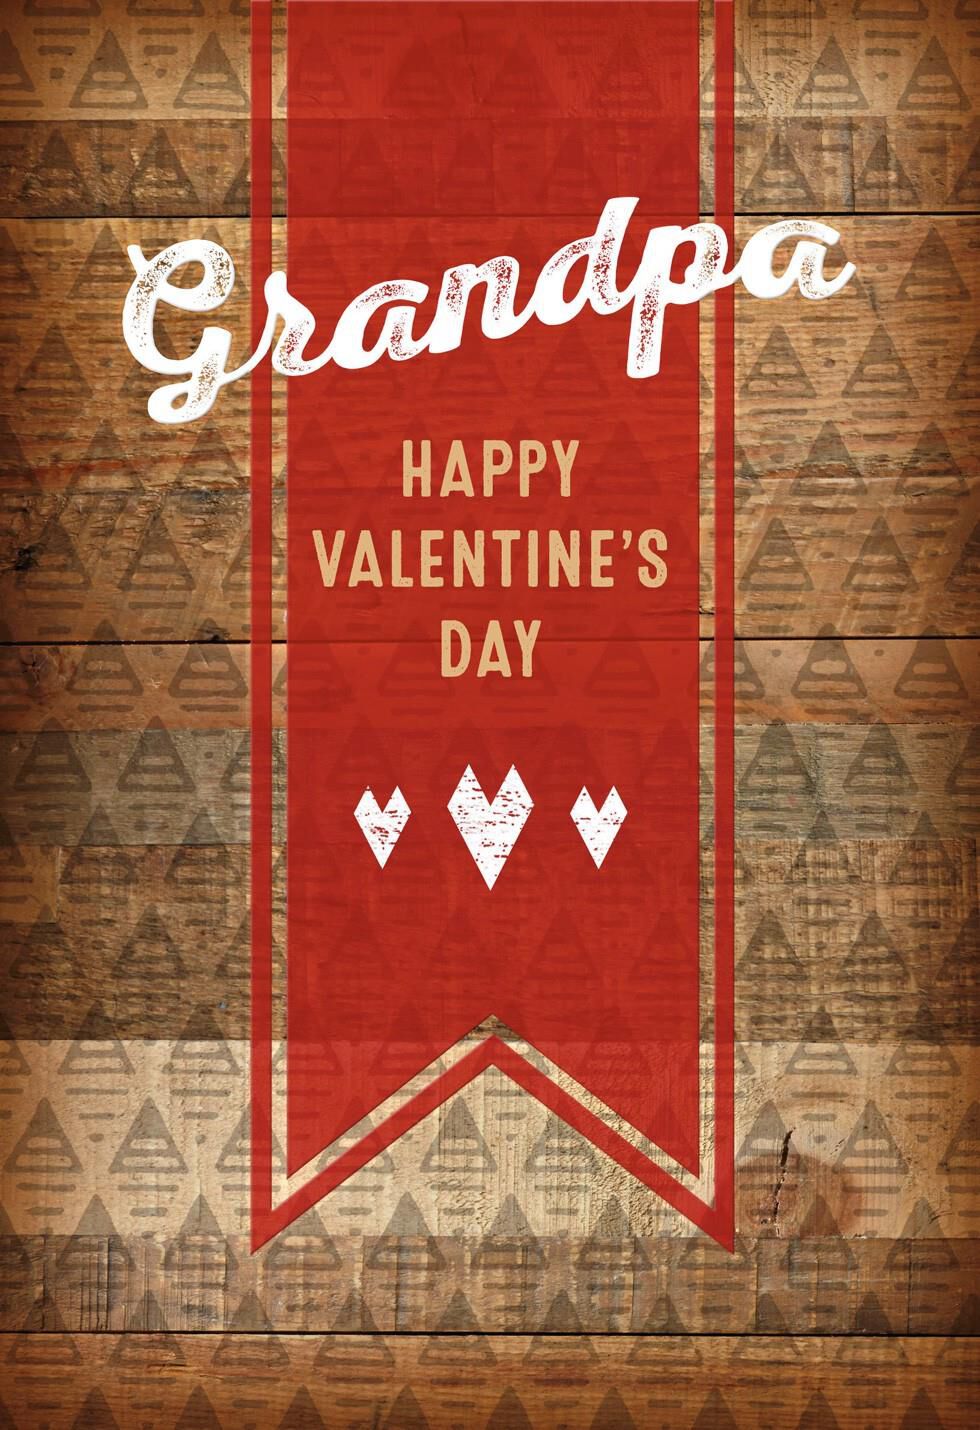 Download Grandpa Thanks Valentine's Day Card - Greeting Cards ...